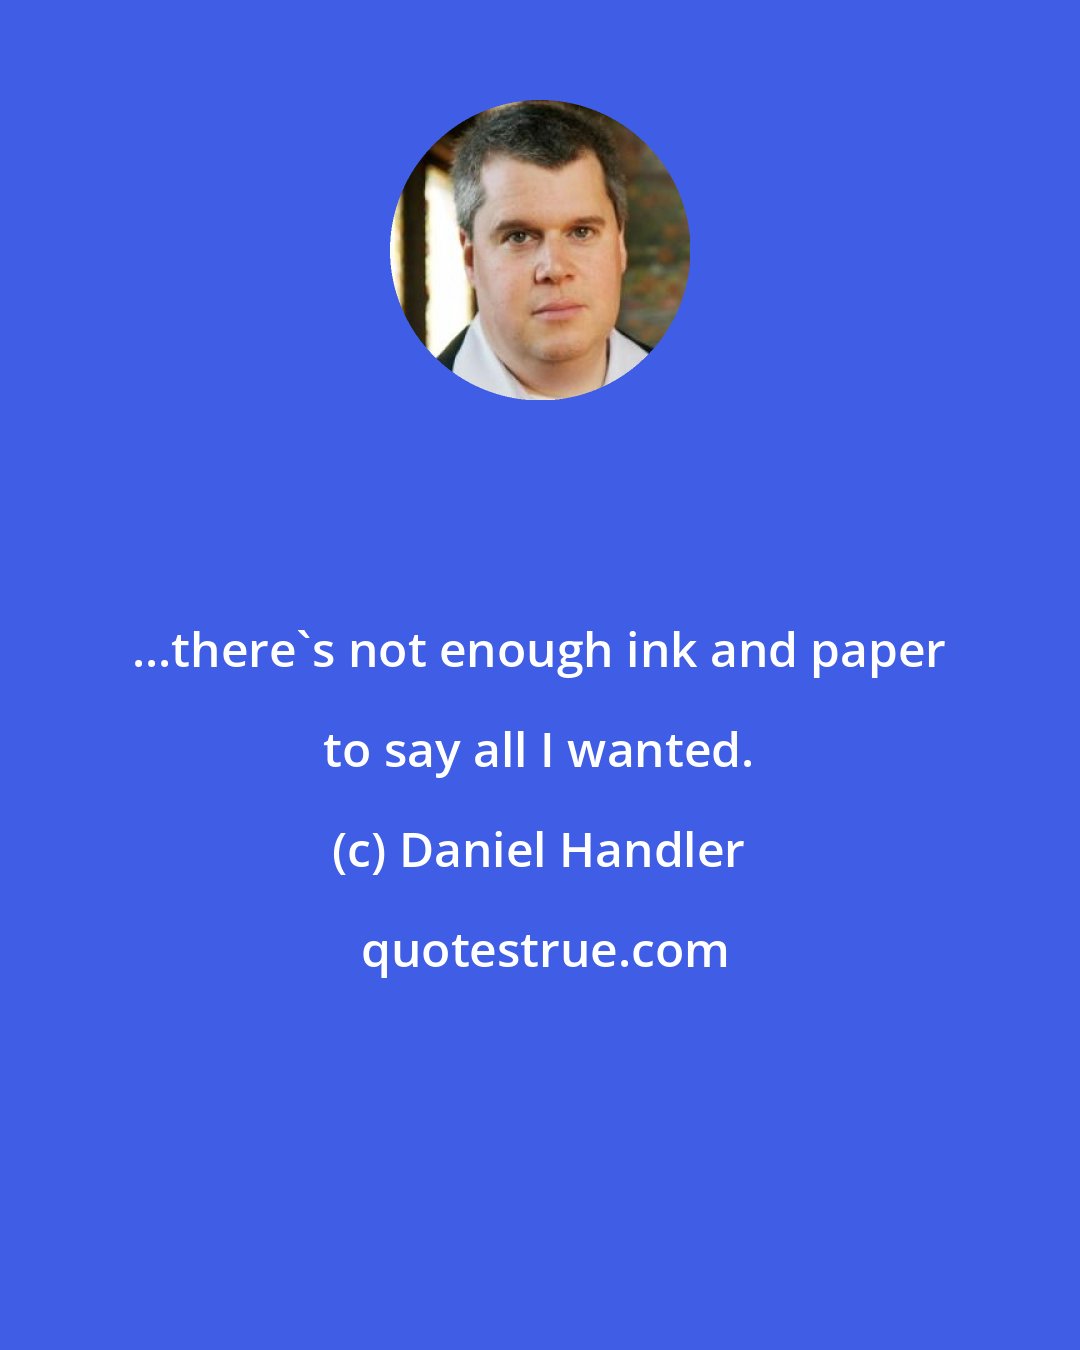 Daniel Handler: ...there's not enough ink and paper to say all I wanted.